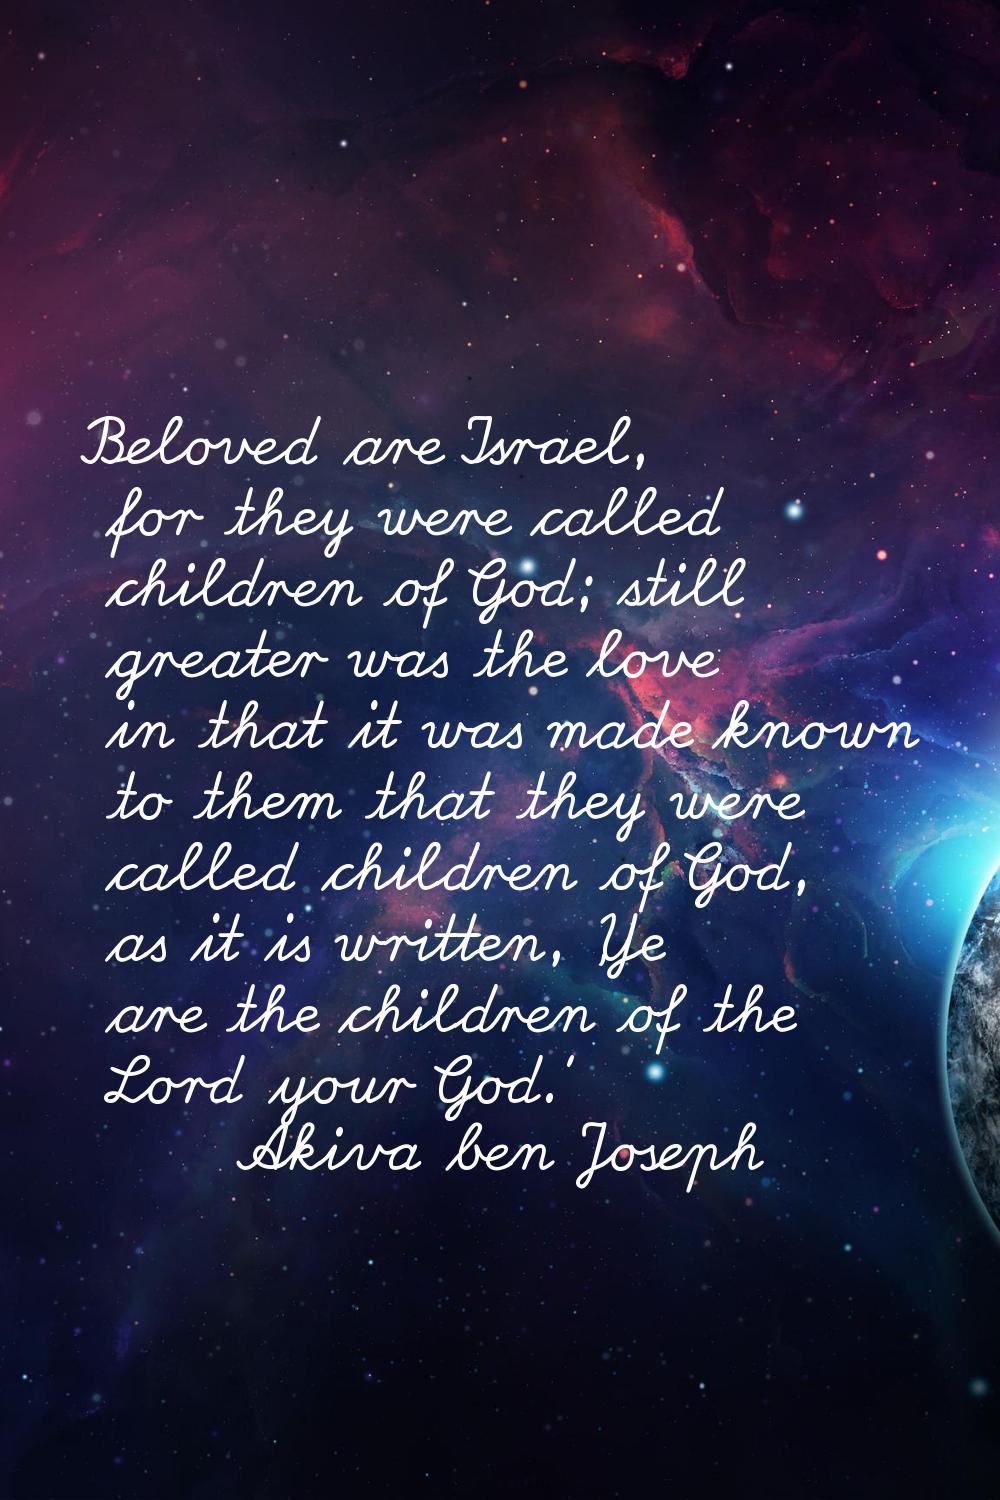 Beloved are Israel, for they were called children of God; still greater was the love in that it was